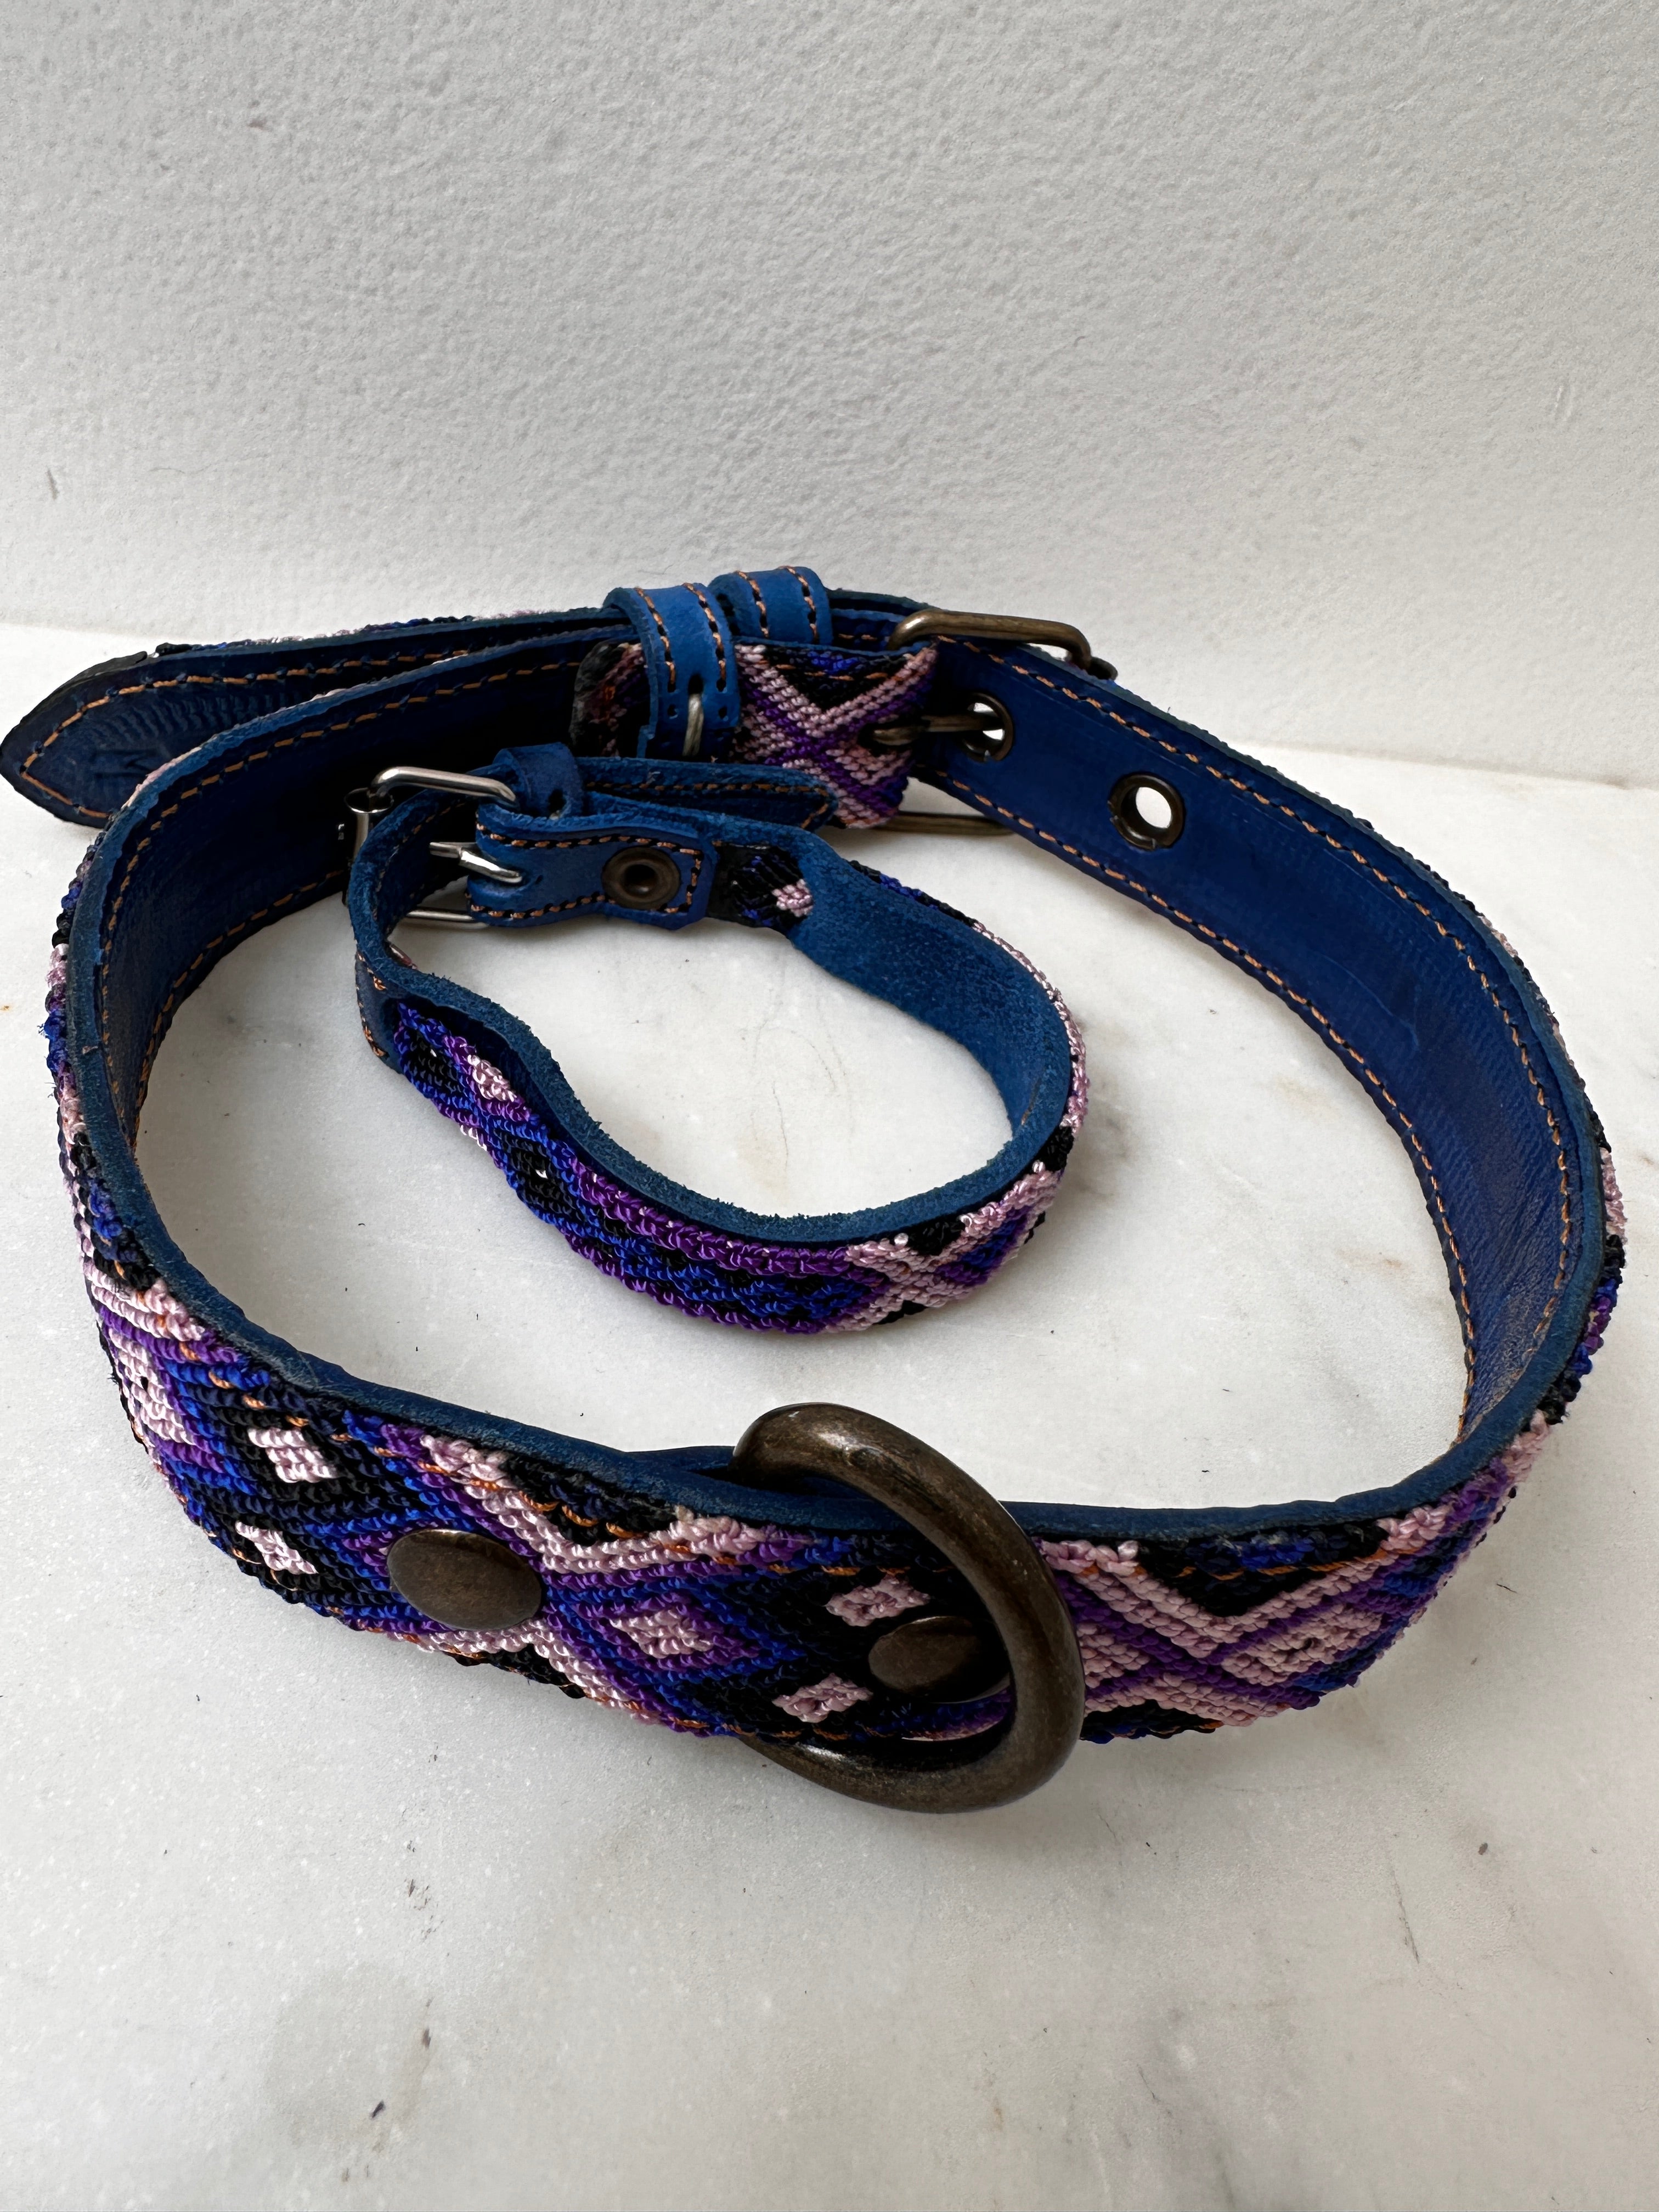 Future Nomads Homewares One Size Huichol Fully Embroidered Dog Collar M5